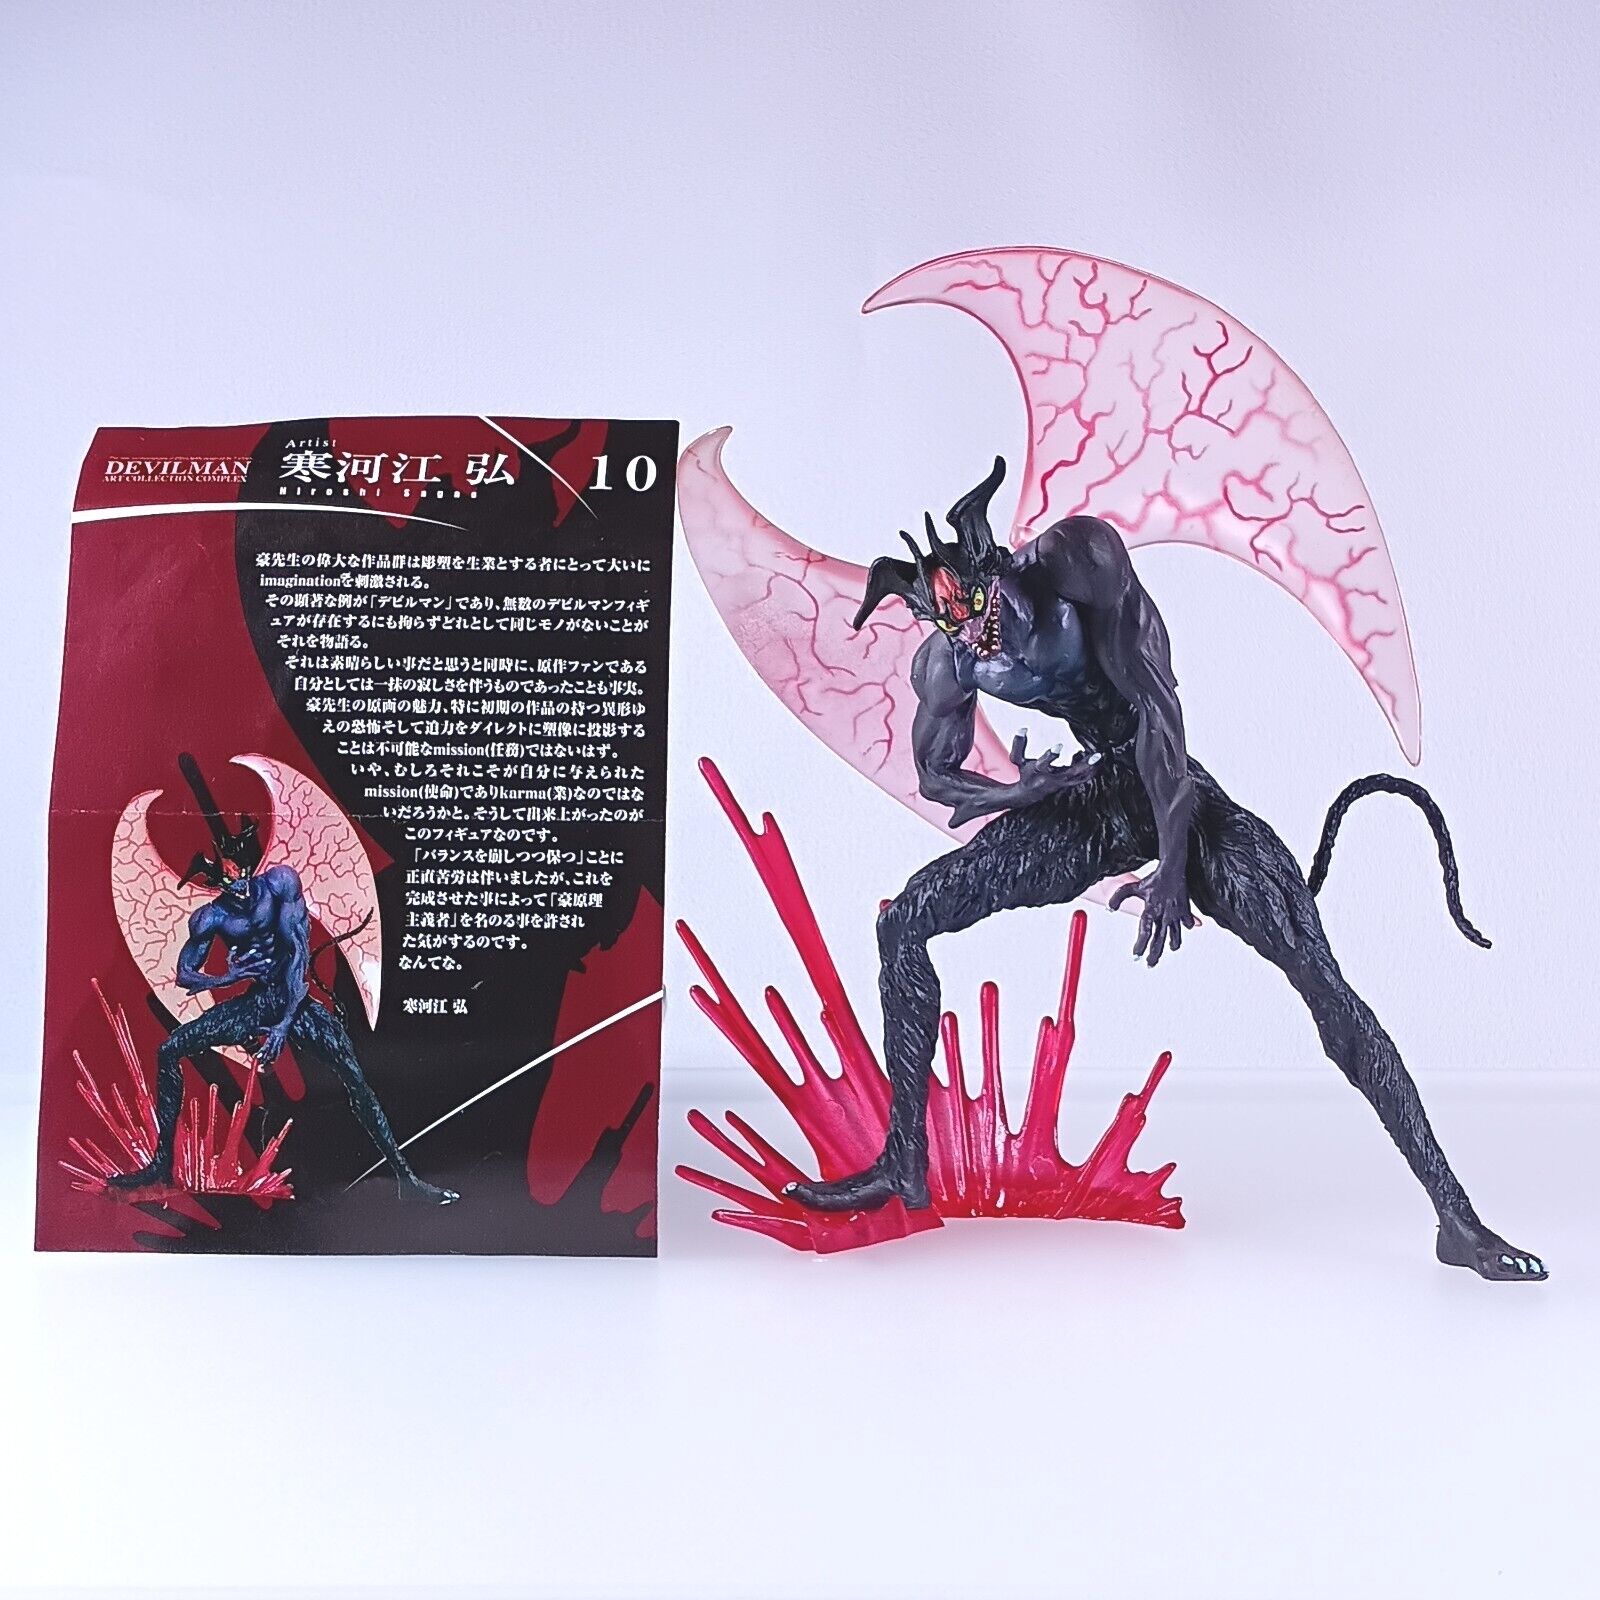 Devilman FiguAx Extreme Art Collection Complex Figure From Japan F/S